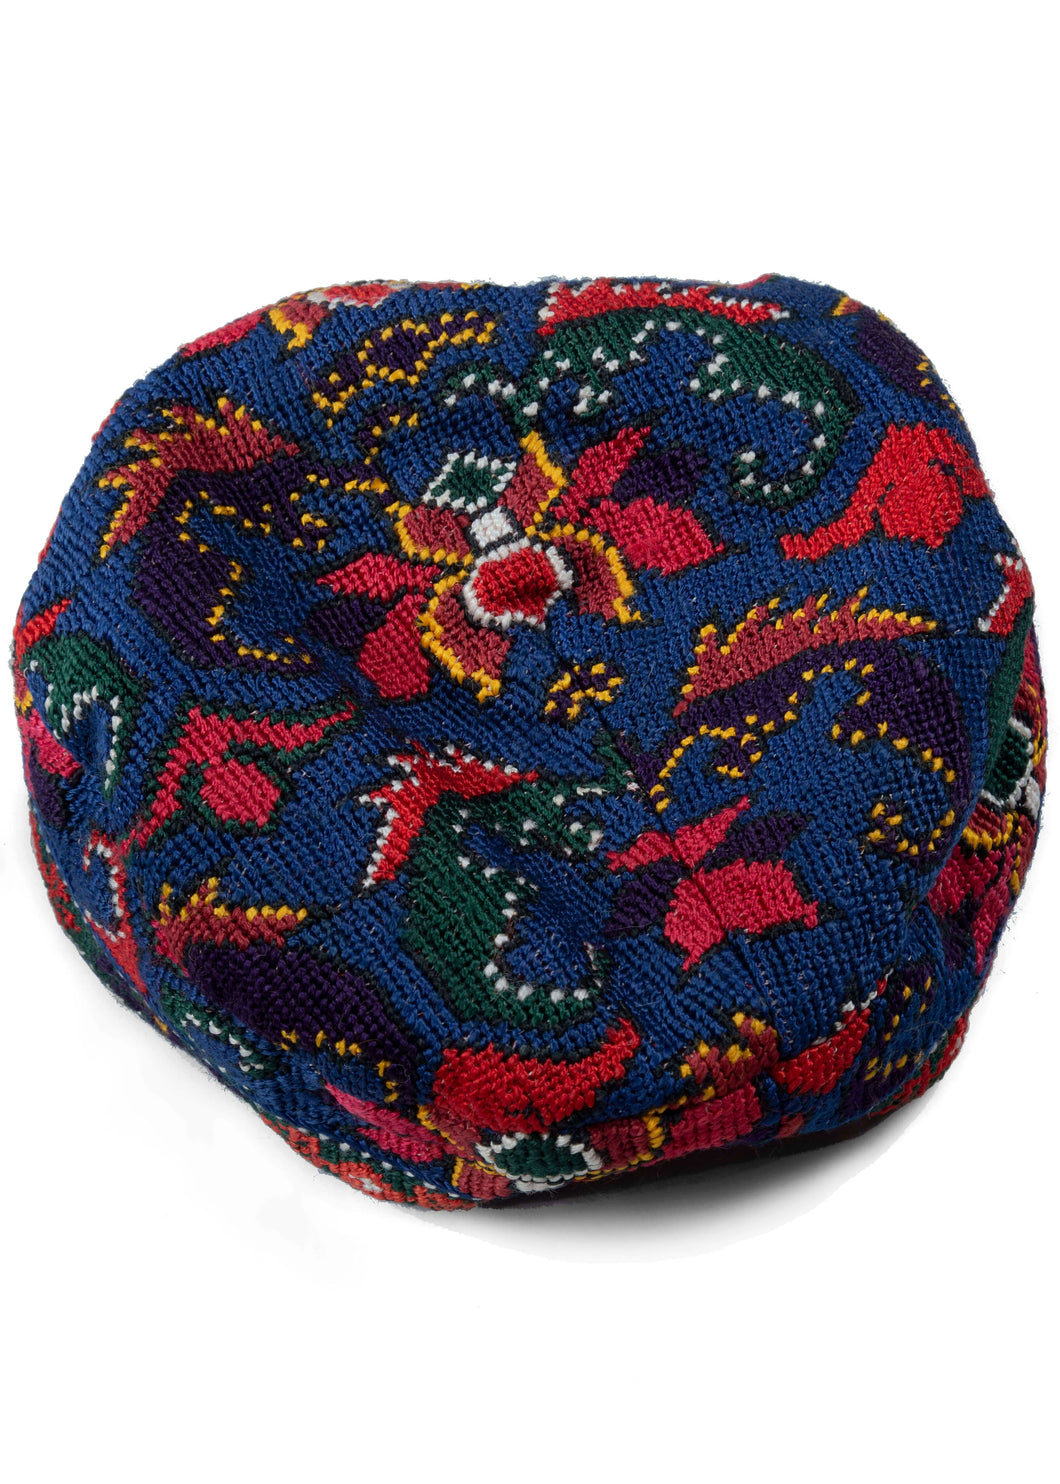 Embroidered Uzbek skull cap cross stitched of silk and features a variety blossoming palmettes in bright reds, greens, purples and yellow on blue ground. The edge of the skull cup is finished nicely with a thin border panel of opposing tridents.